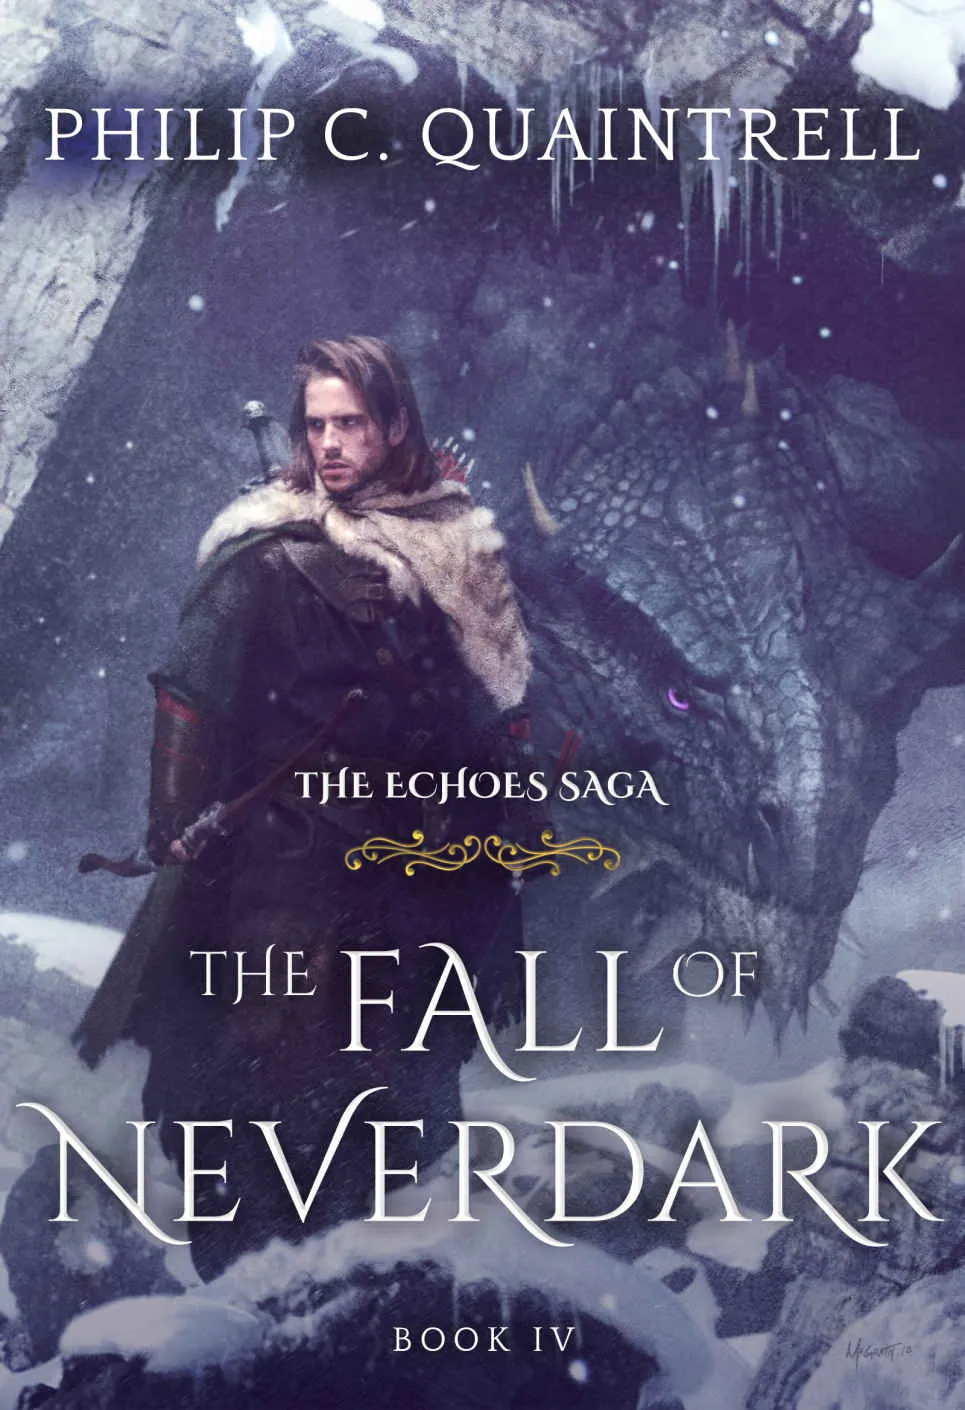 The Fall of Neverdark (The Echoes Saga #4)